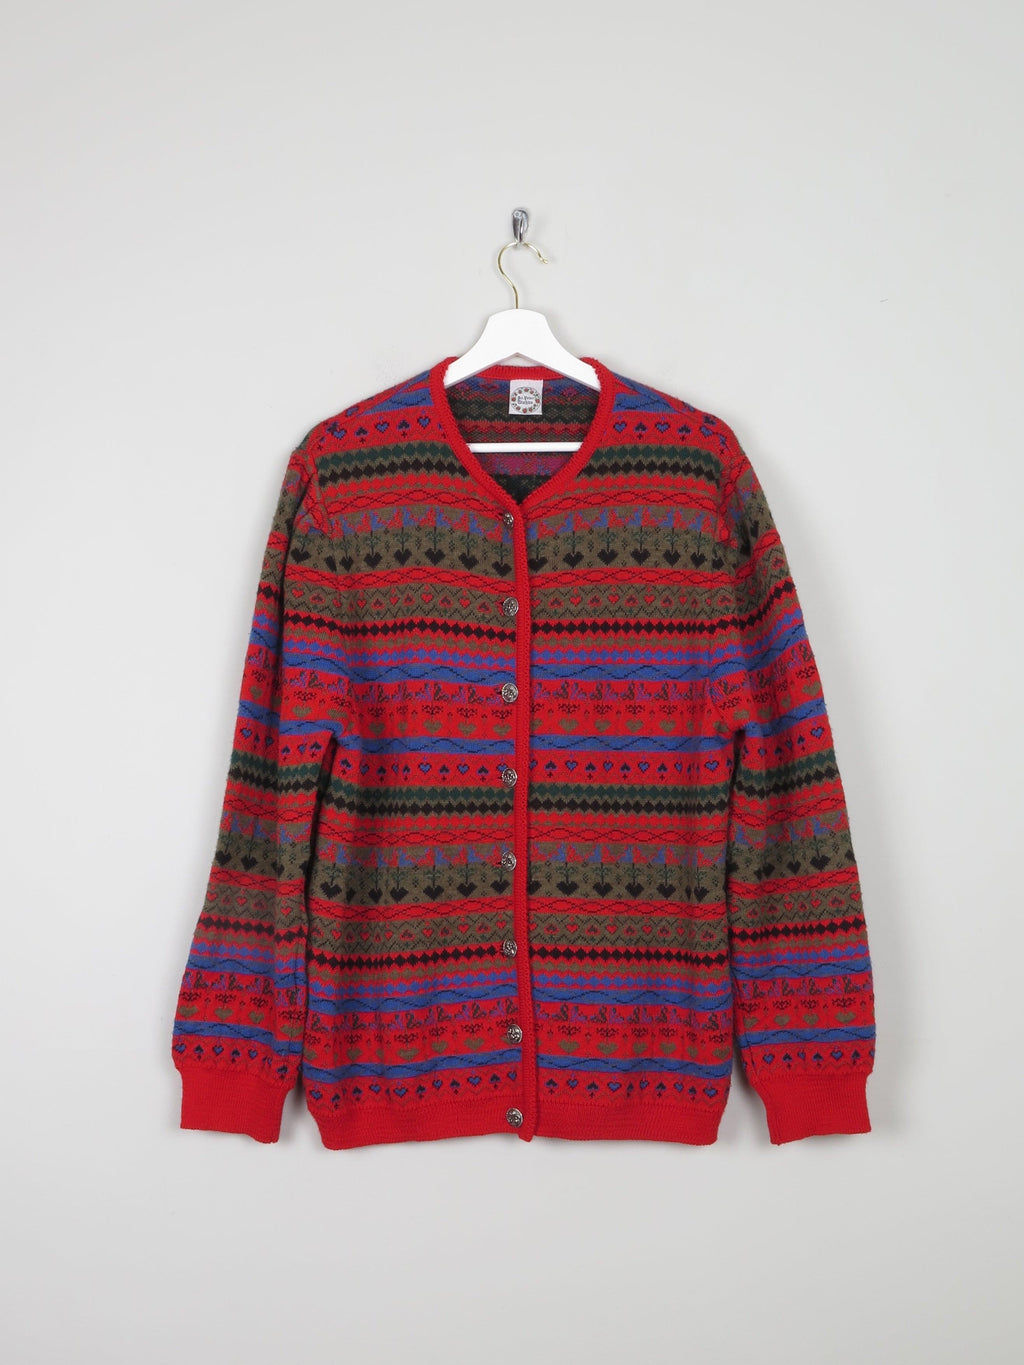 Women's Red Patterned Vintage Cardigan L /XL - The Harlequin